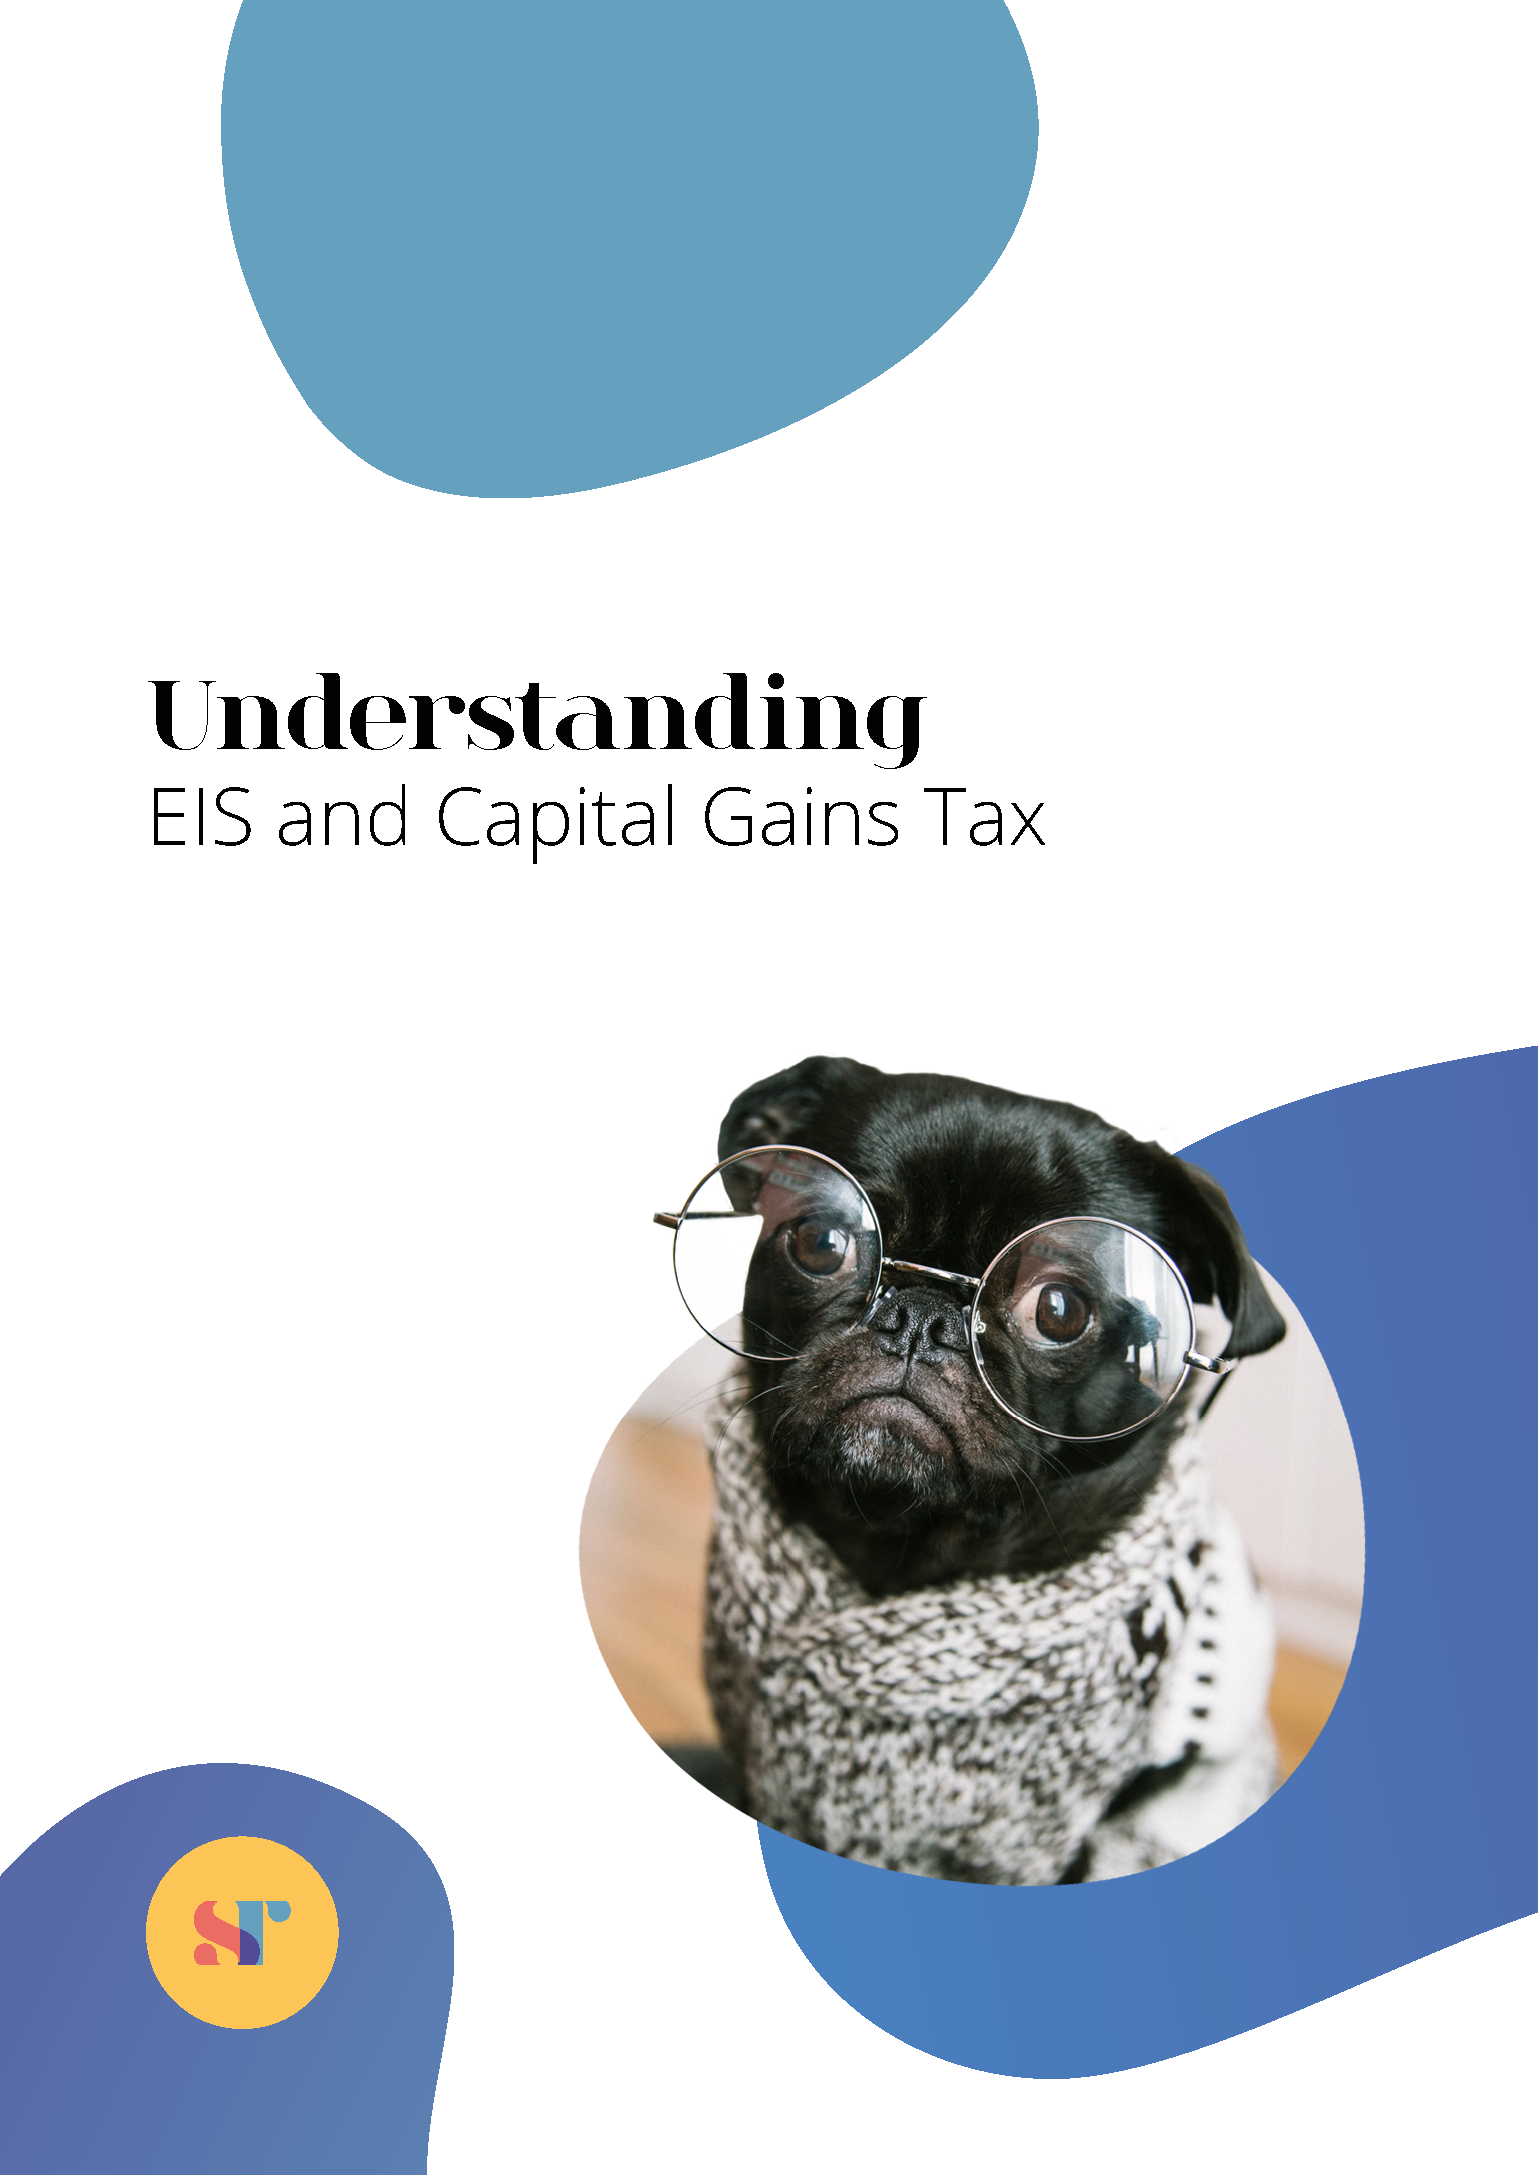 Access capital gains and eis guide